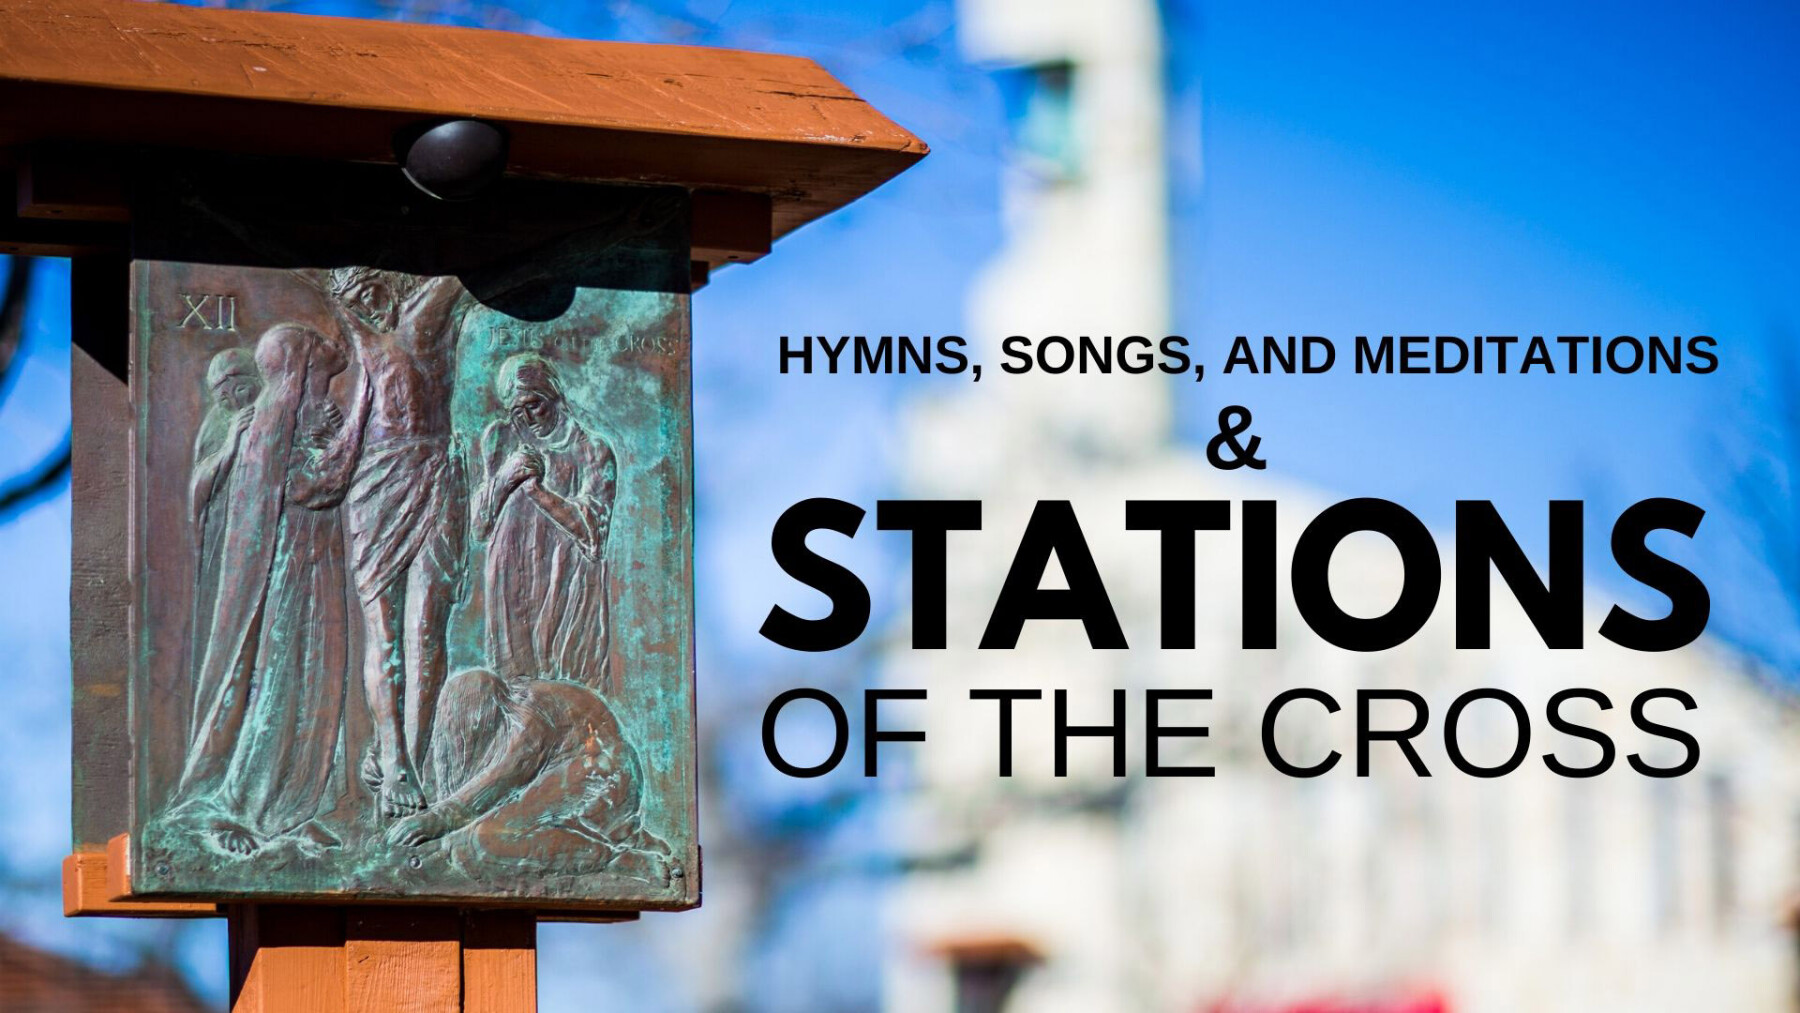 Hymns, Songs, and Meditations